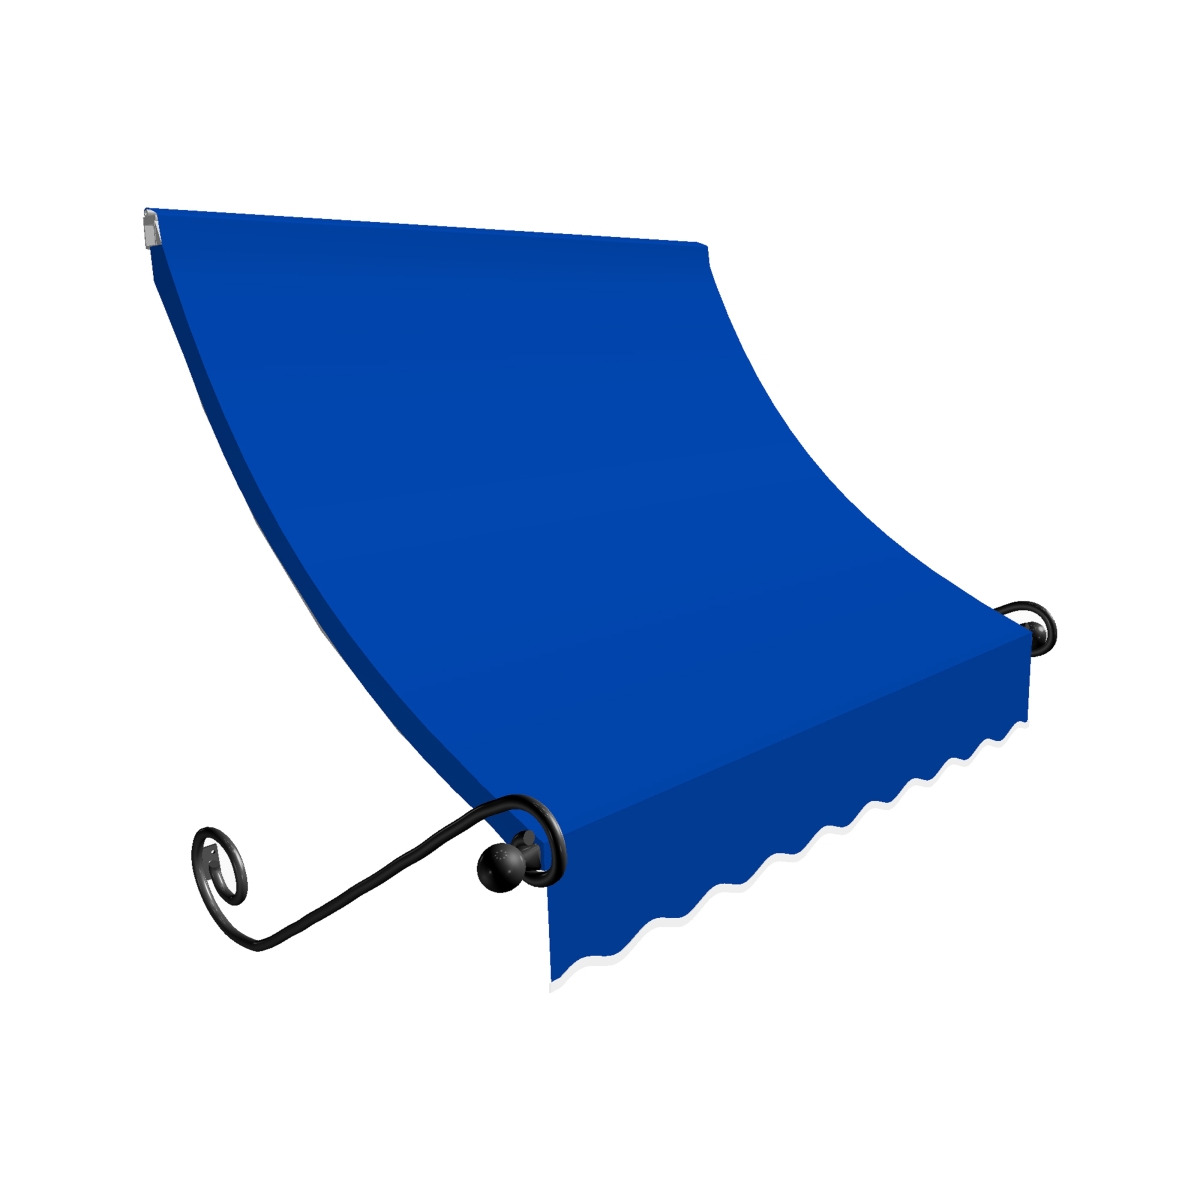 Ch22-us-3bb 3.38 Ft. Charleston Window & Entry Awning, Bright Blue - 31 X 24 In.